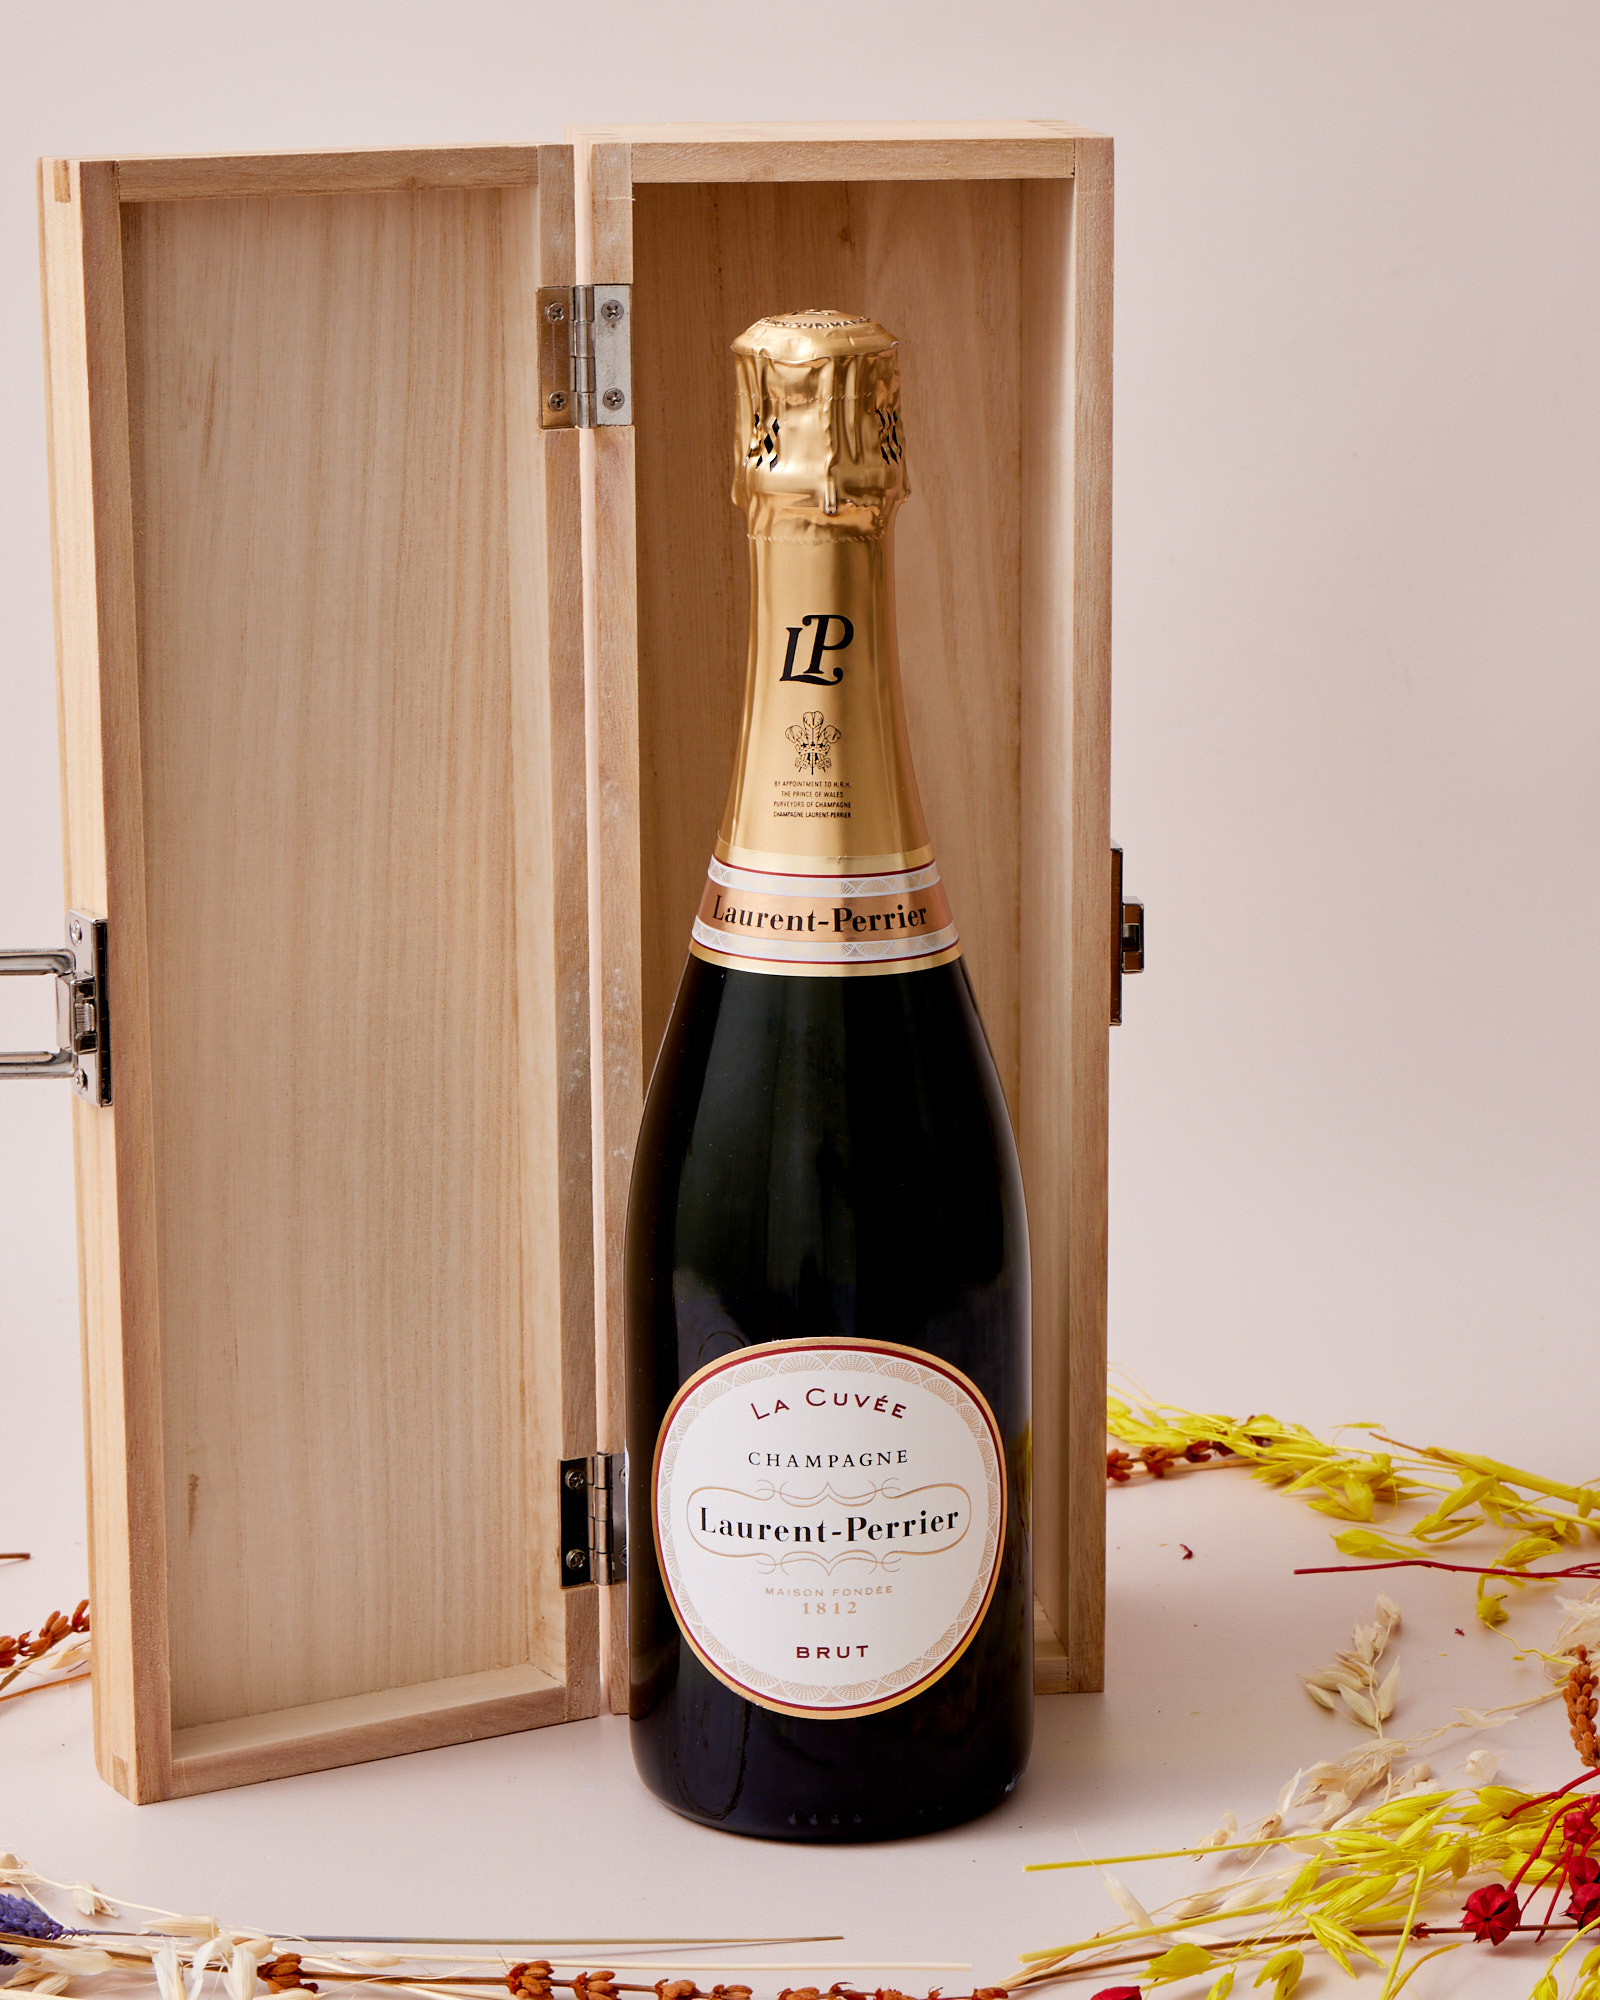 Engraved Wooden Box With Laurent-Perrier Champagne - I Love You Heart